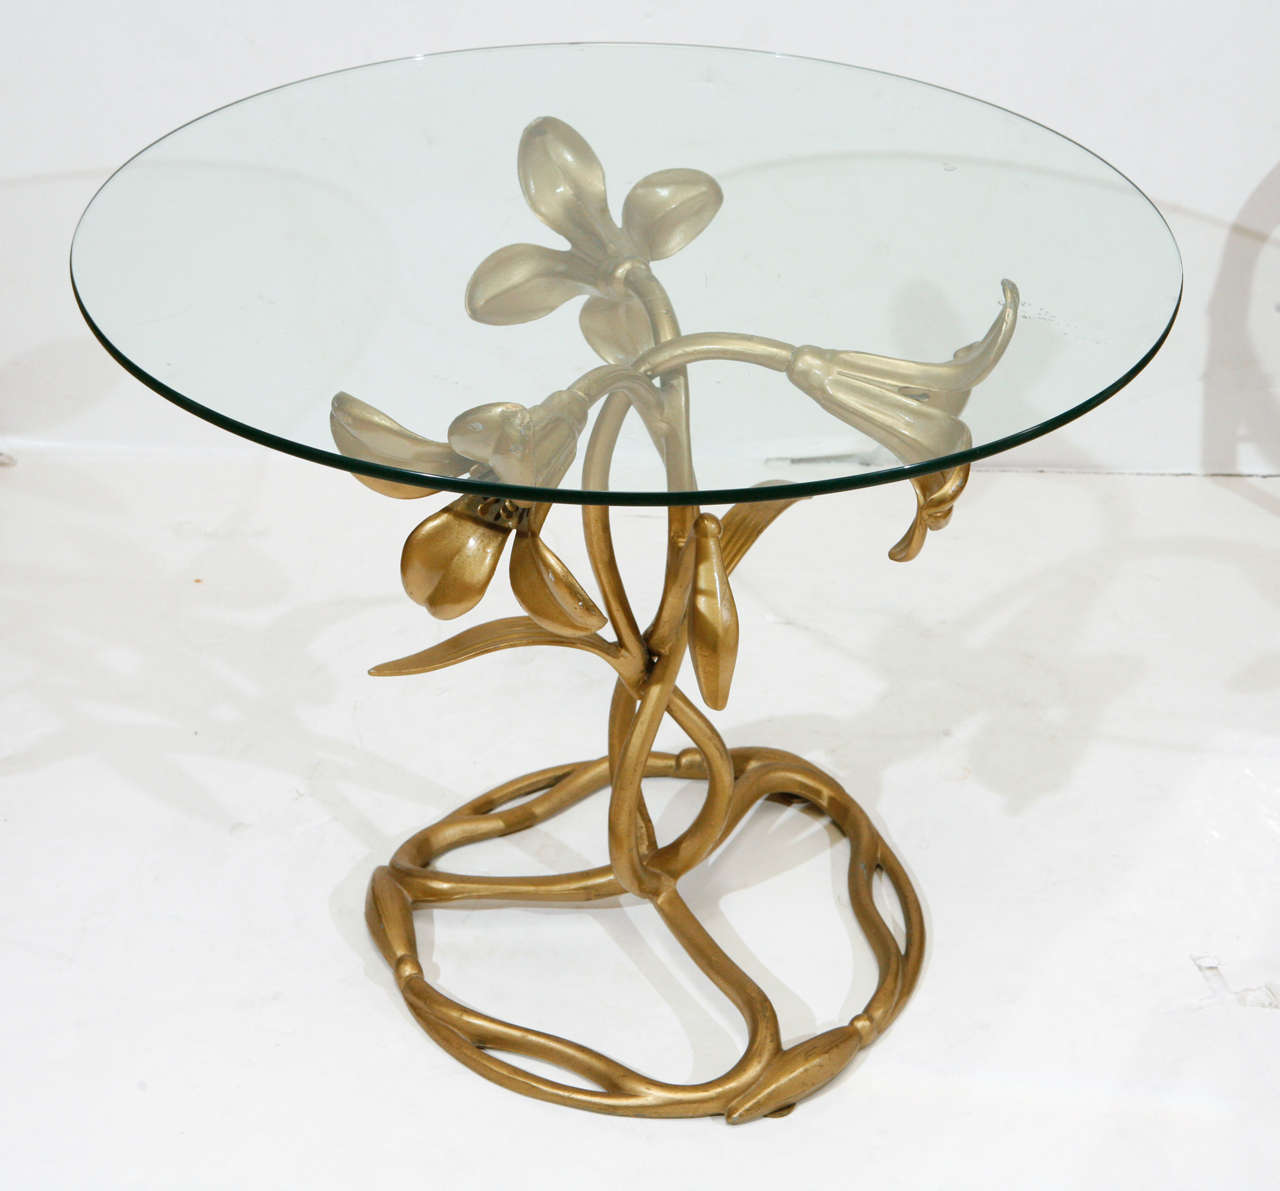 Decorative Art Nouveau and gilded aluminum lily side table with glass top by Arthur Court.